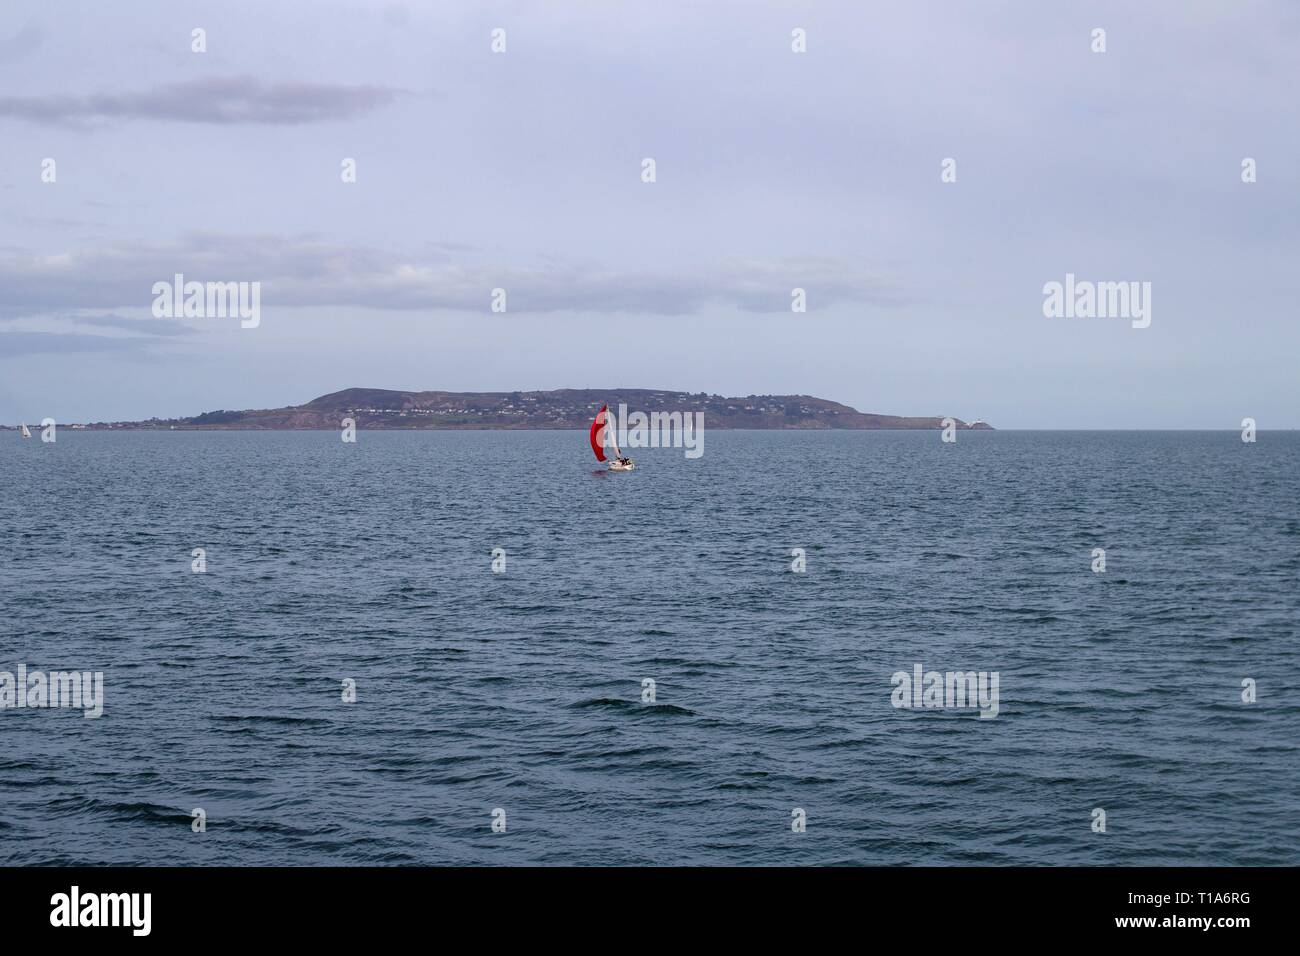 A yacht with a distinctive red sail sailing opposite Dun Laoghaire Harbour with Howth Head in the background. Stock Photo